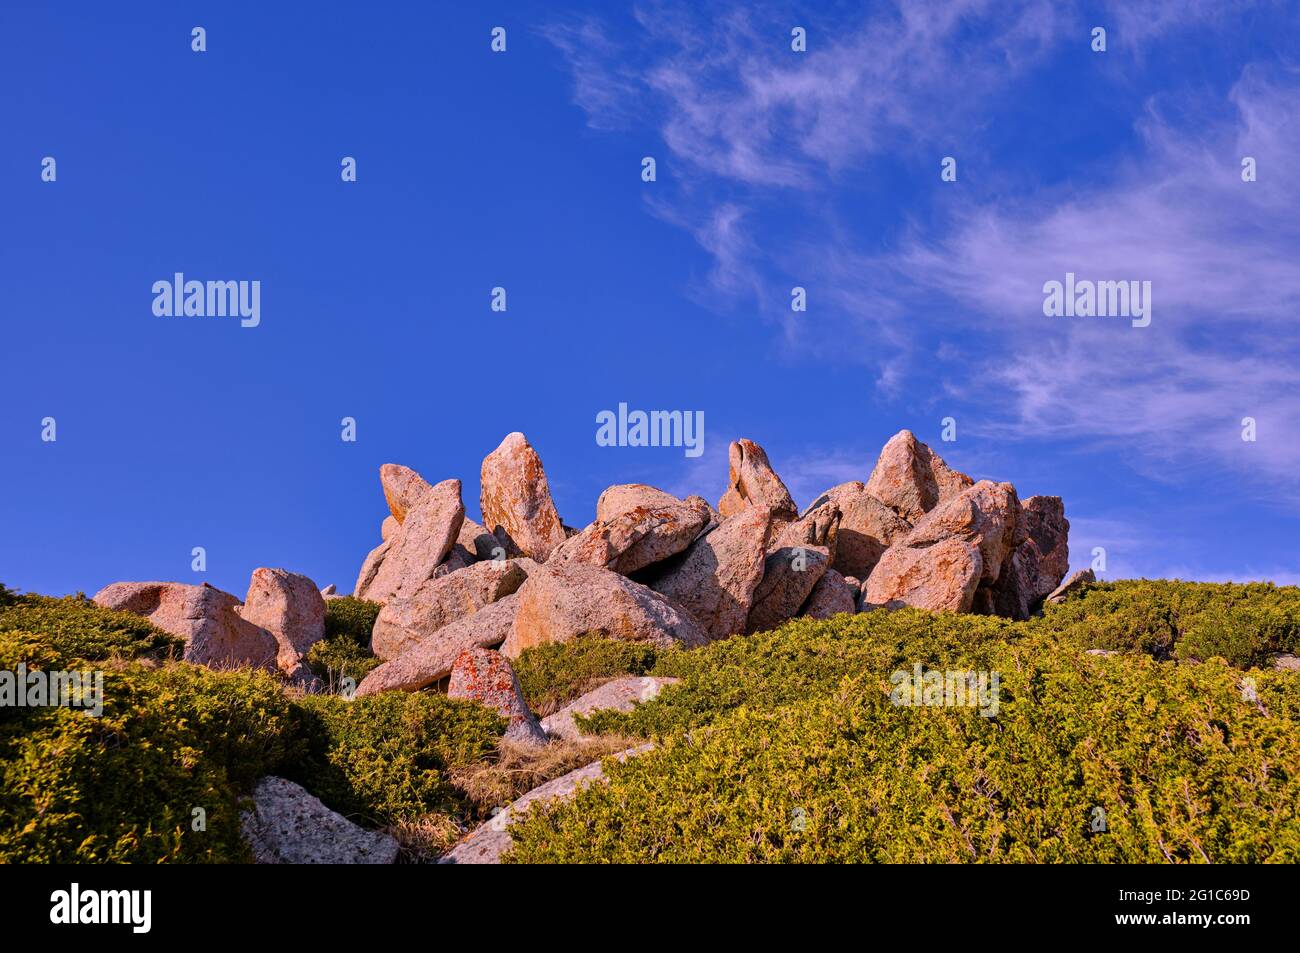 Exquisite rock formations among the juniper bushes on a background of blue sky with clouds Stock Photo